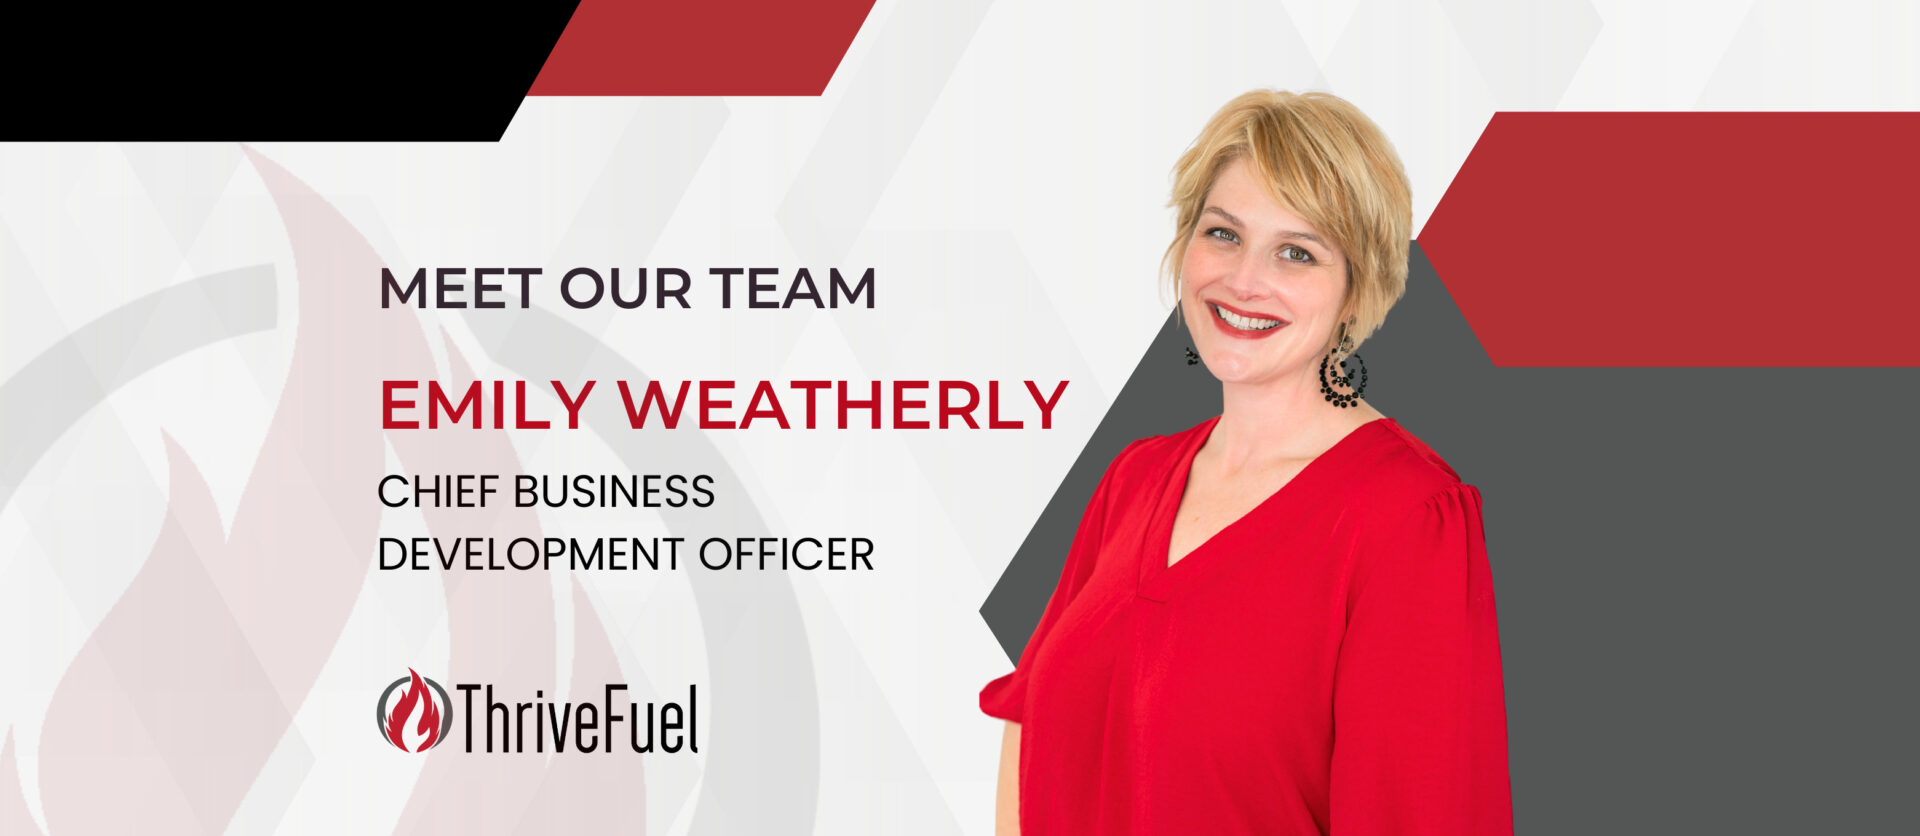 Please Welcome Emily Weatherly to ThriveFuel!